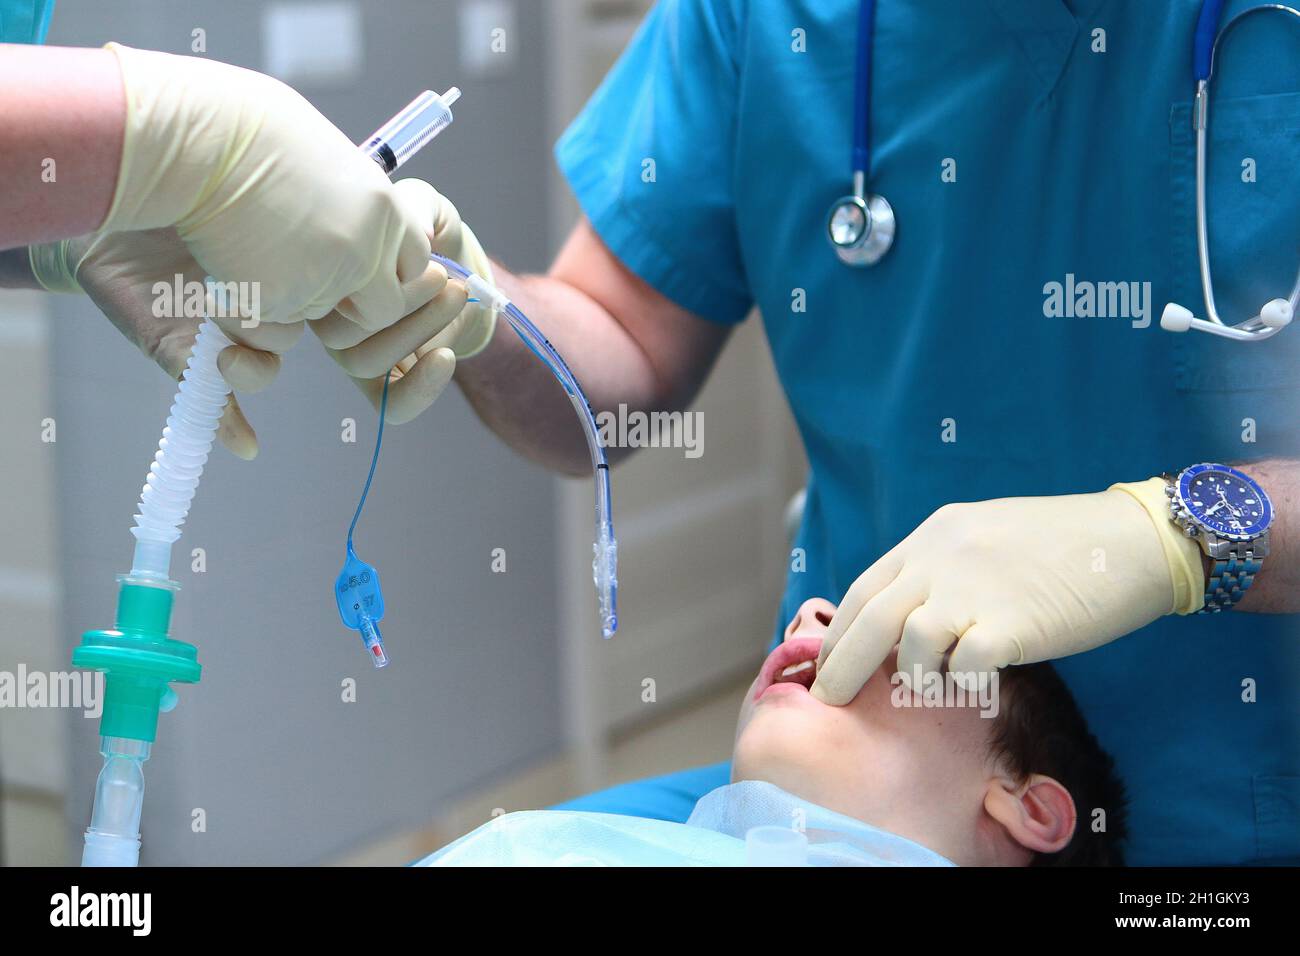 The anaesthetist and assistant remove the child from anesthesia. End of the operation. Concept of health care and life saving. Copy space. An unrecogn Stock Photo